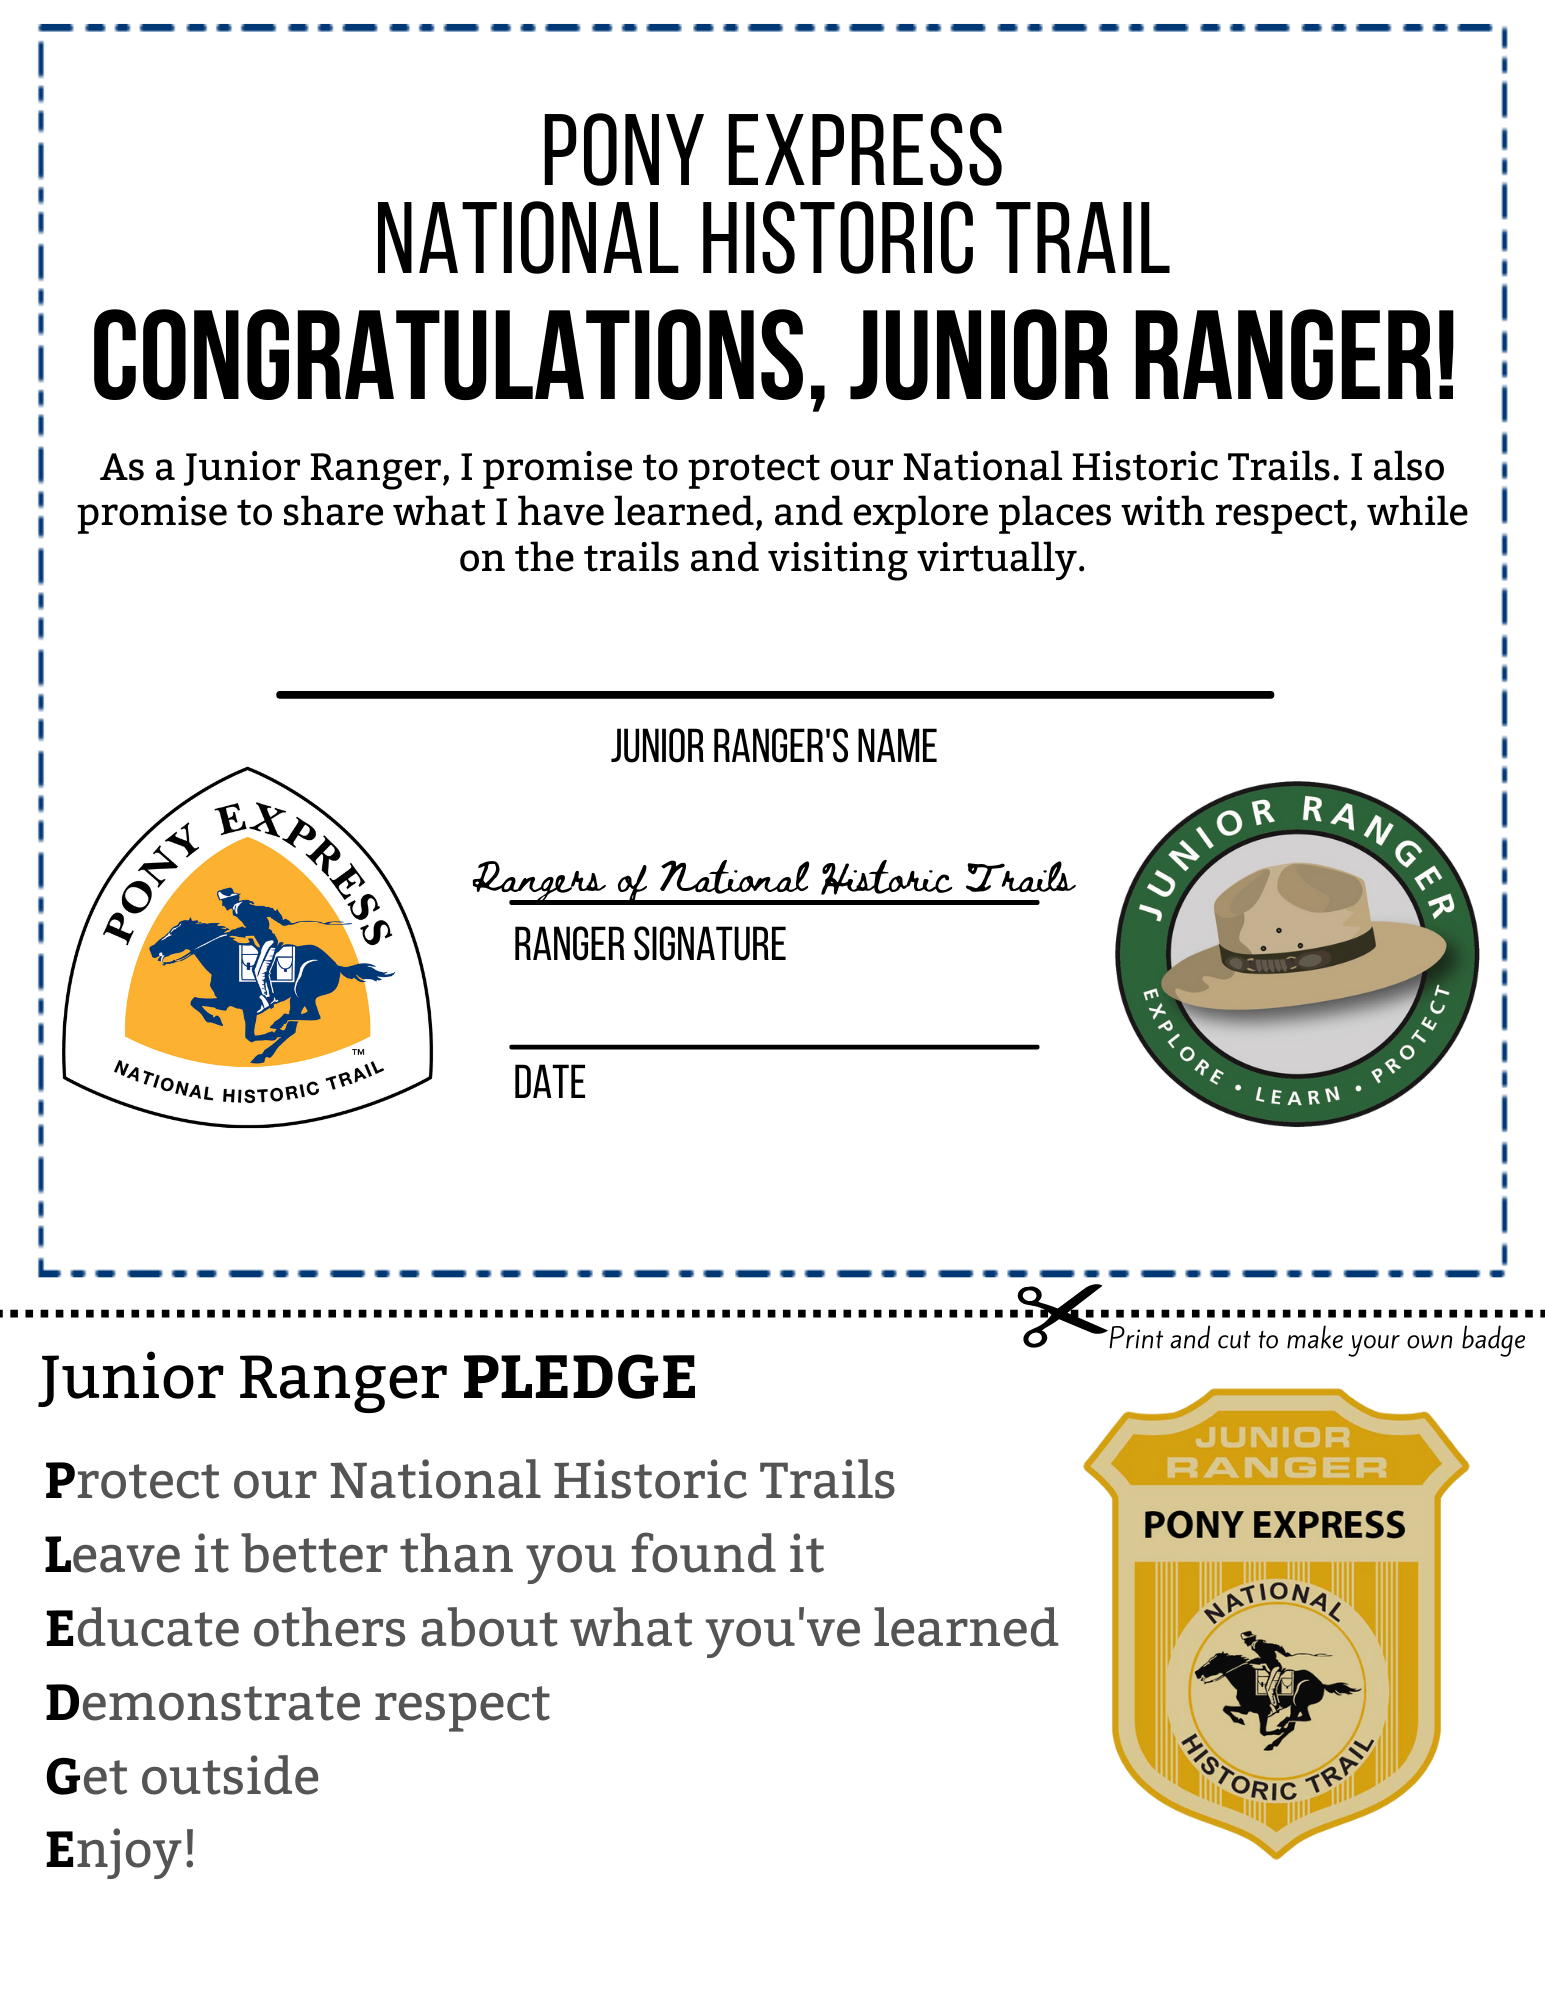 A certificate that includes a junior ranger badge image.